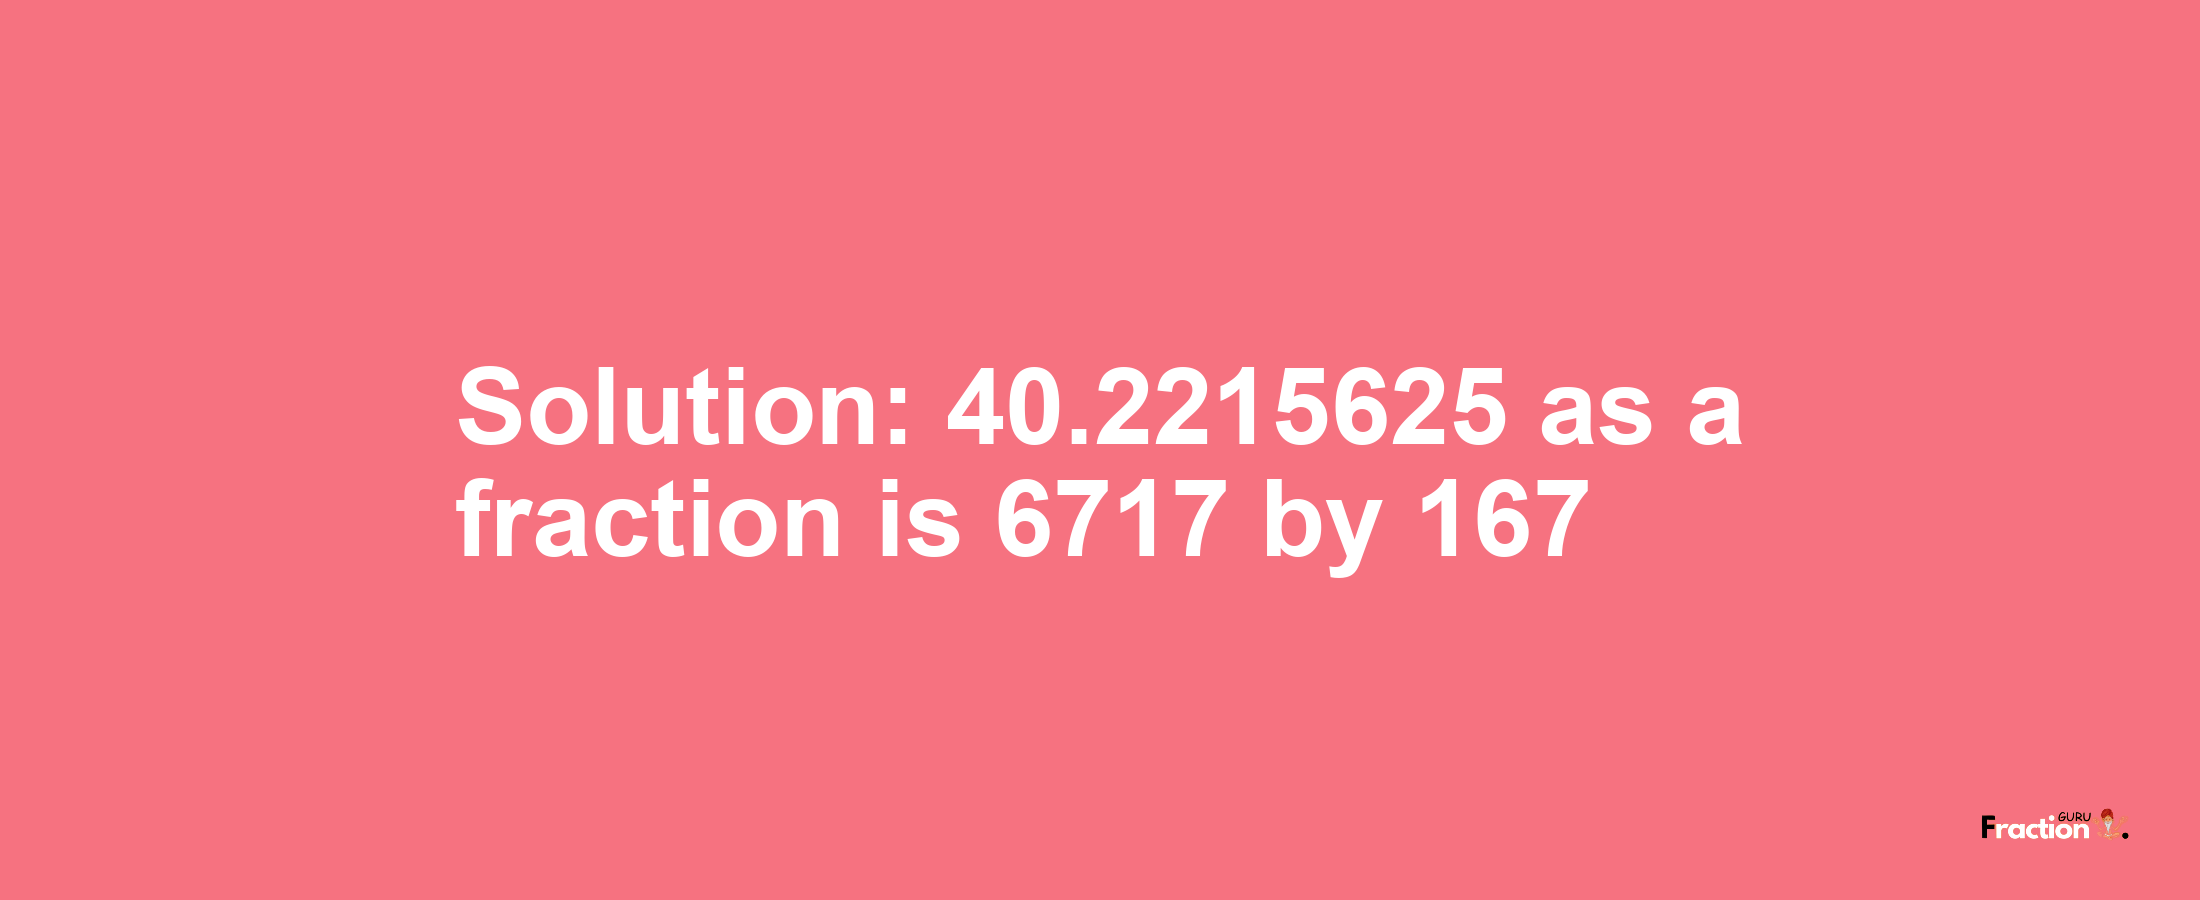 Solution:40.2215625 as a fraction is 6717/167